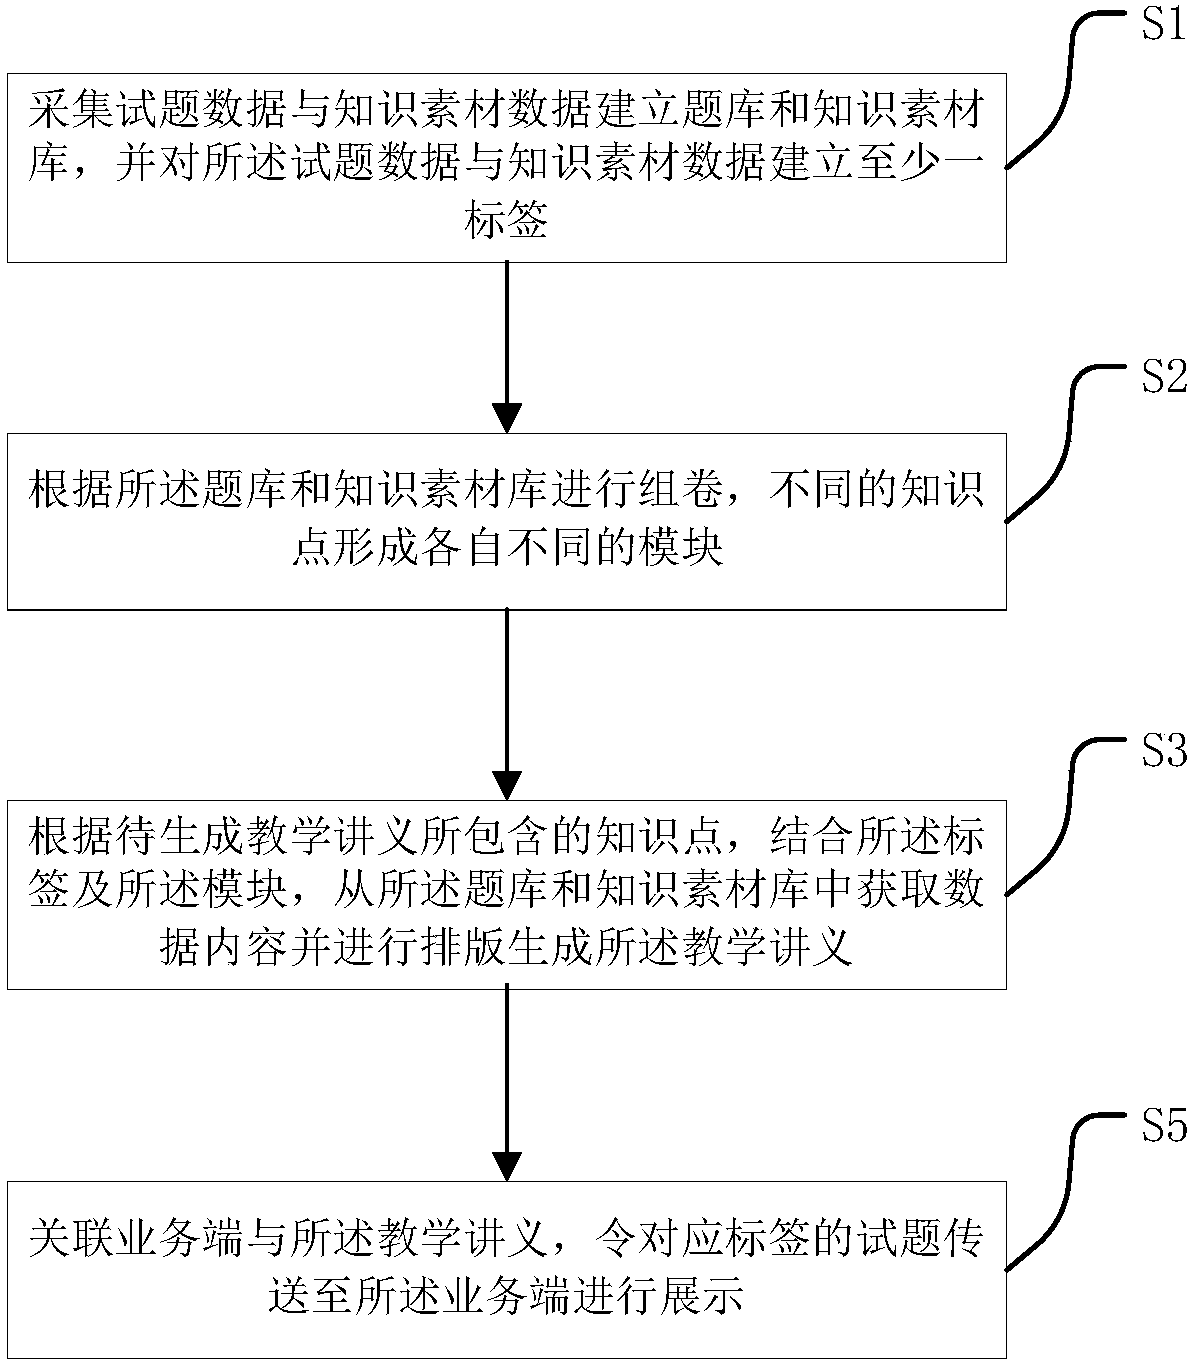 Question bank system-based teaching note generation method and device